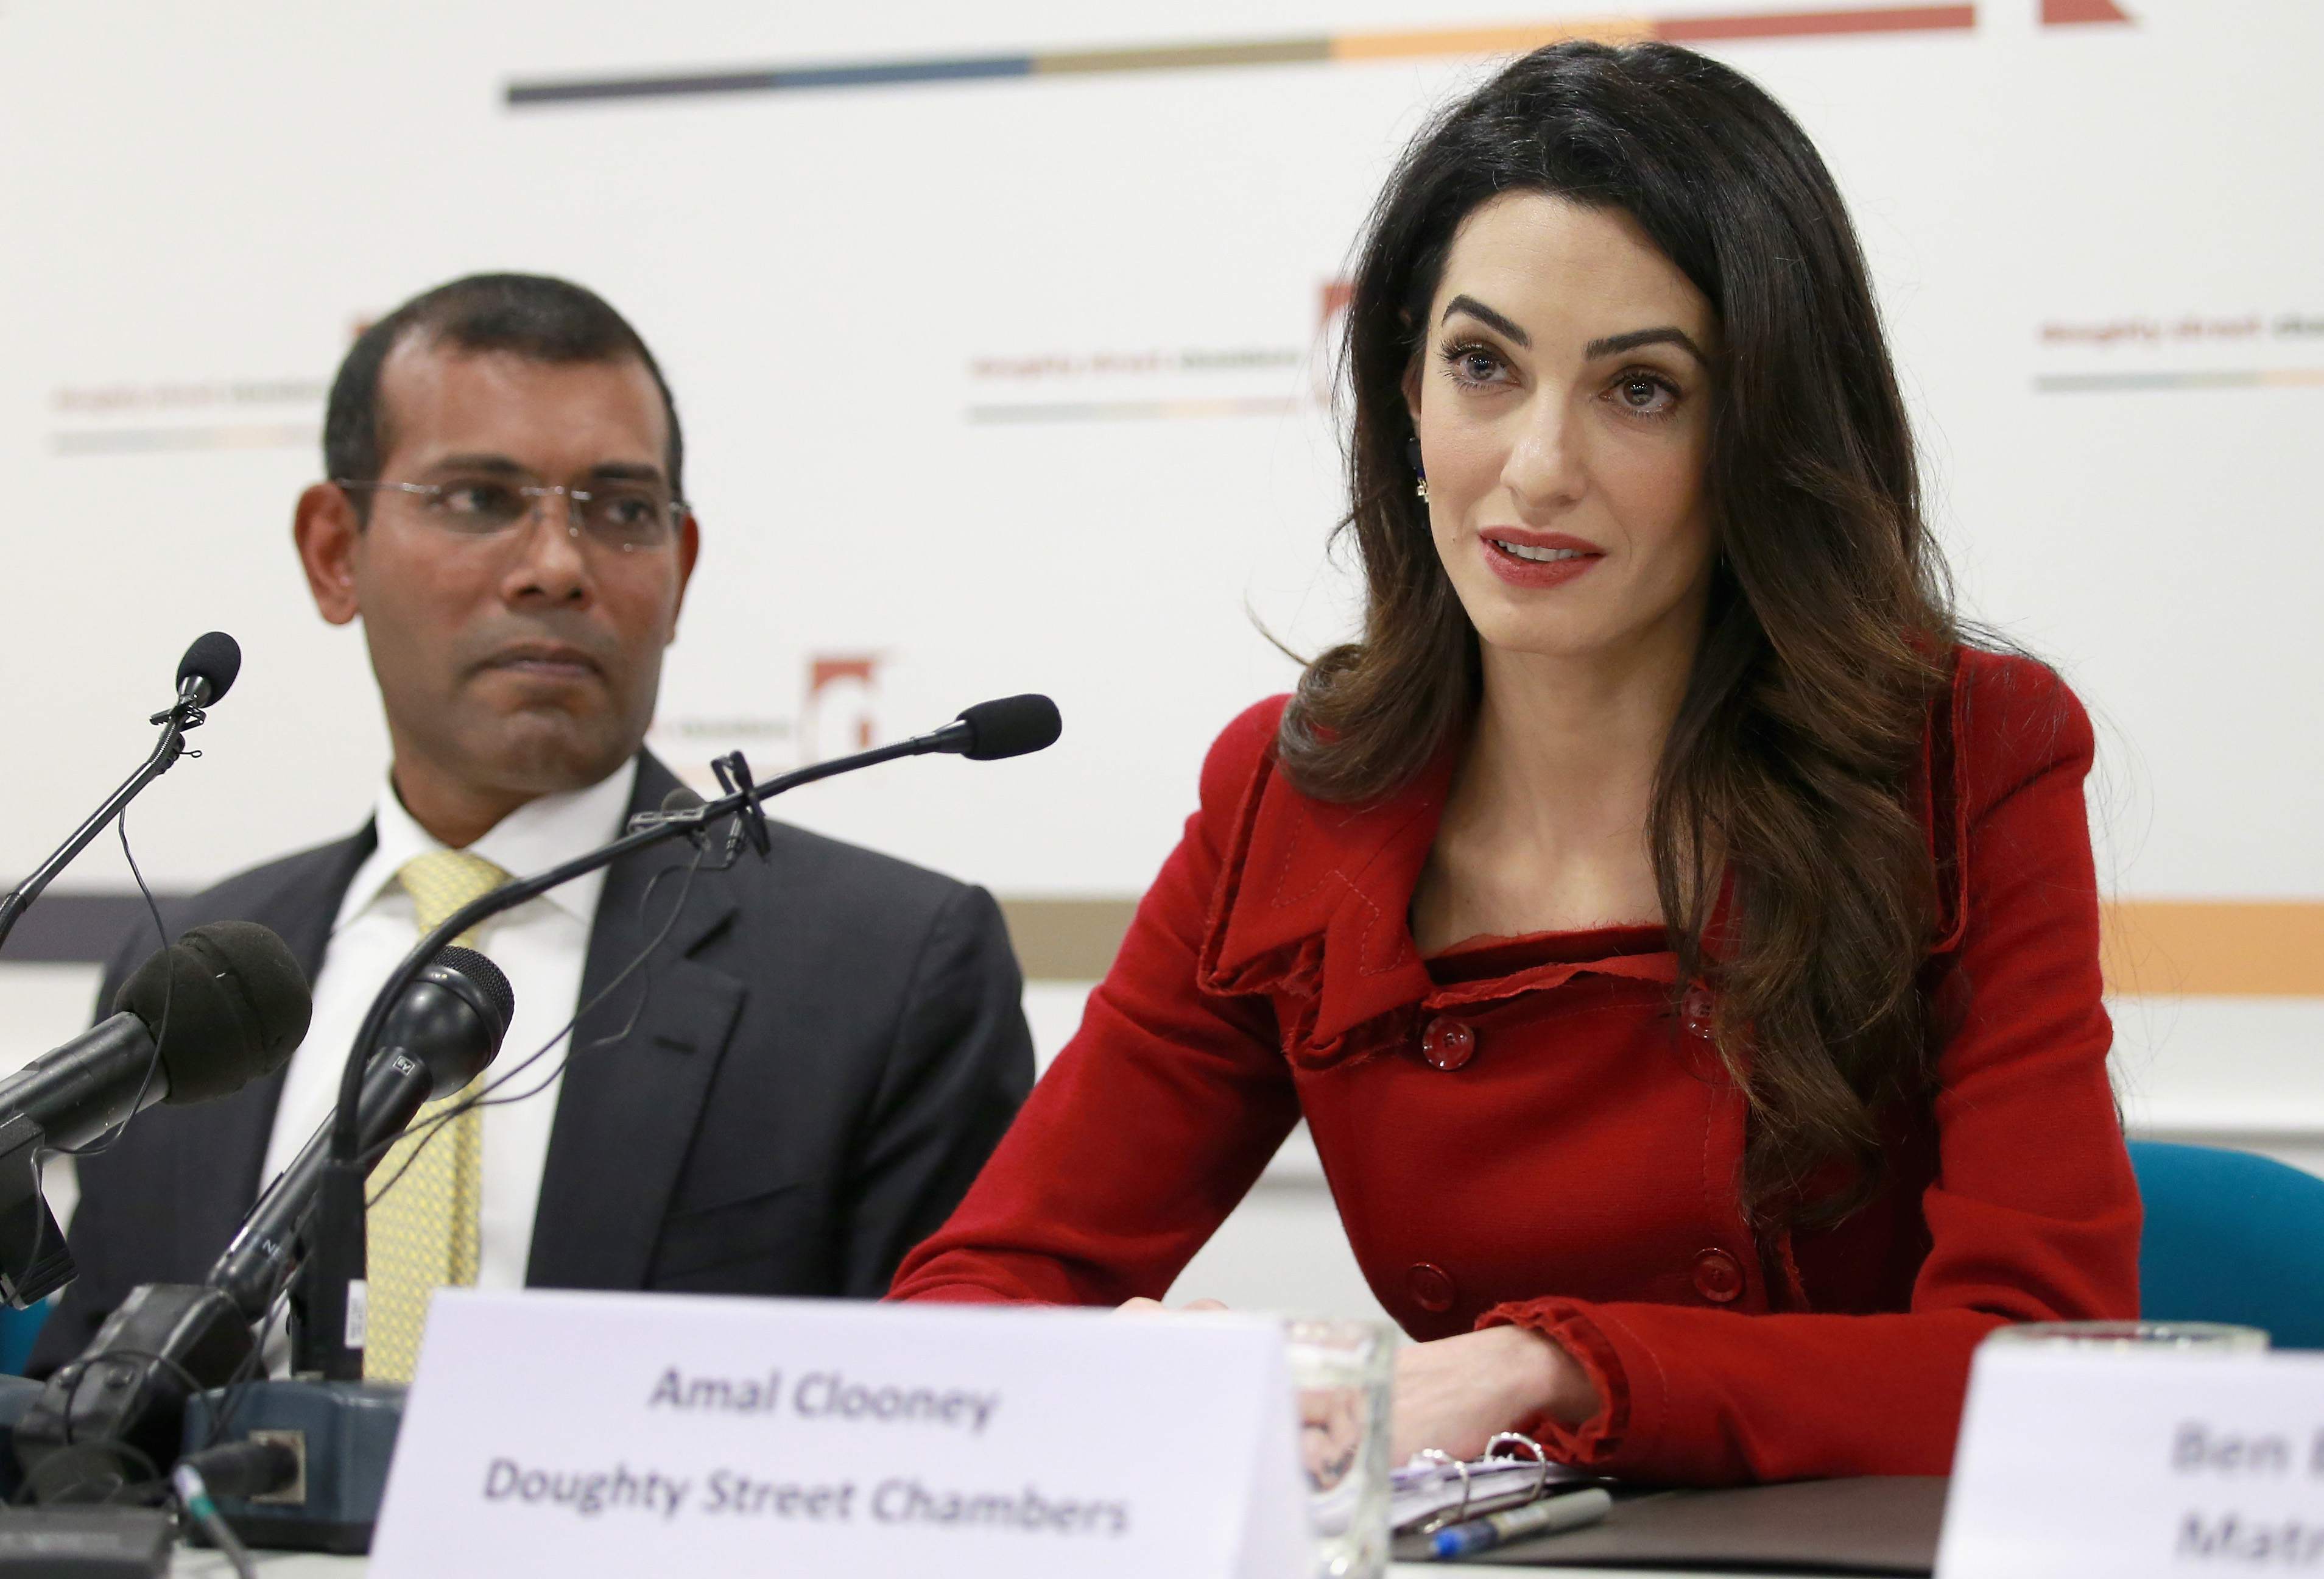 LONDON, ENGLAND - JANUARY 25: Amal Clooney of Doughty Street Chambers and President Nasheed of the Maldives attend a press conference at Doughty Street Chambers on January 25, 2016 in London, England. In the first public comments since leaving jail in the Maldives, former President Mohamed Nasheed briefed journalists and the press accompanied by his International Legal Consel Jared Genser of Freedom Now, Amal Clooney of Doughty Street Chambers and Ben Emmerson QC of Matrix Chambers. (Photo by Chris Jackson/Getty Images)